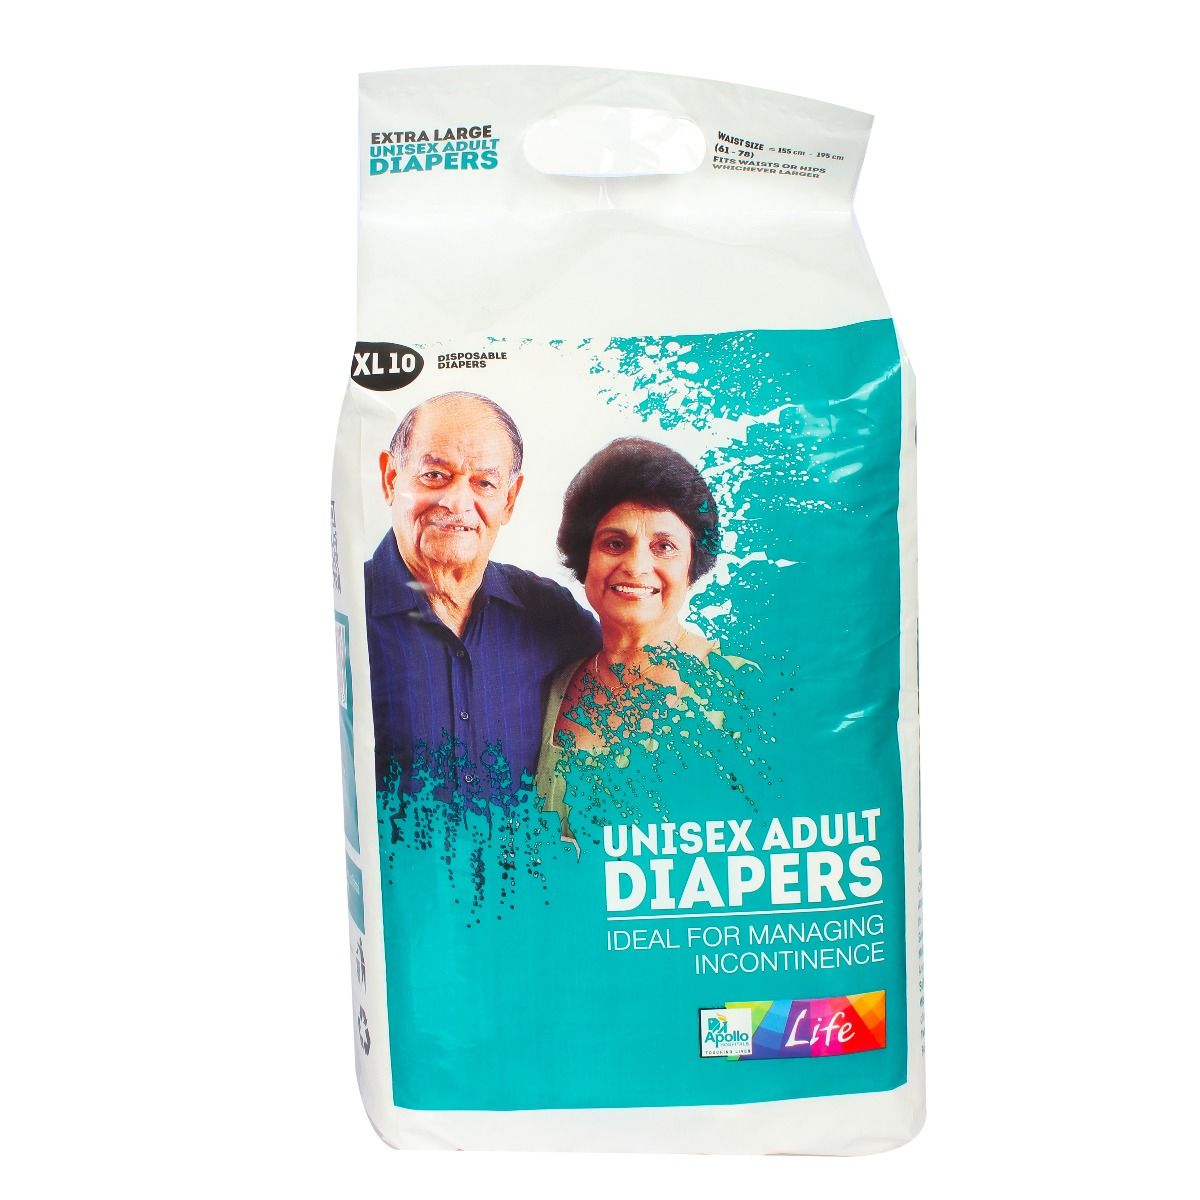 Apollo Life Unisex Adult Diapers XL, 10 Count, Pack of 1 